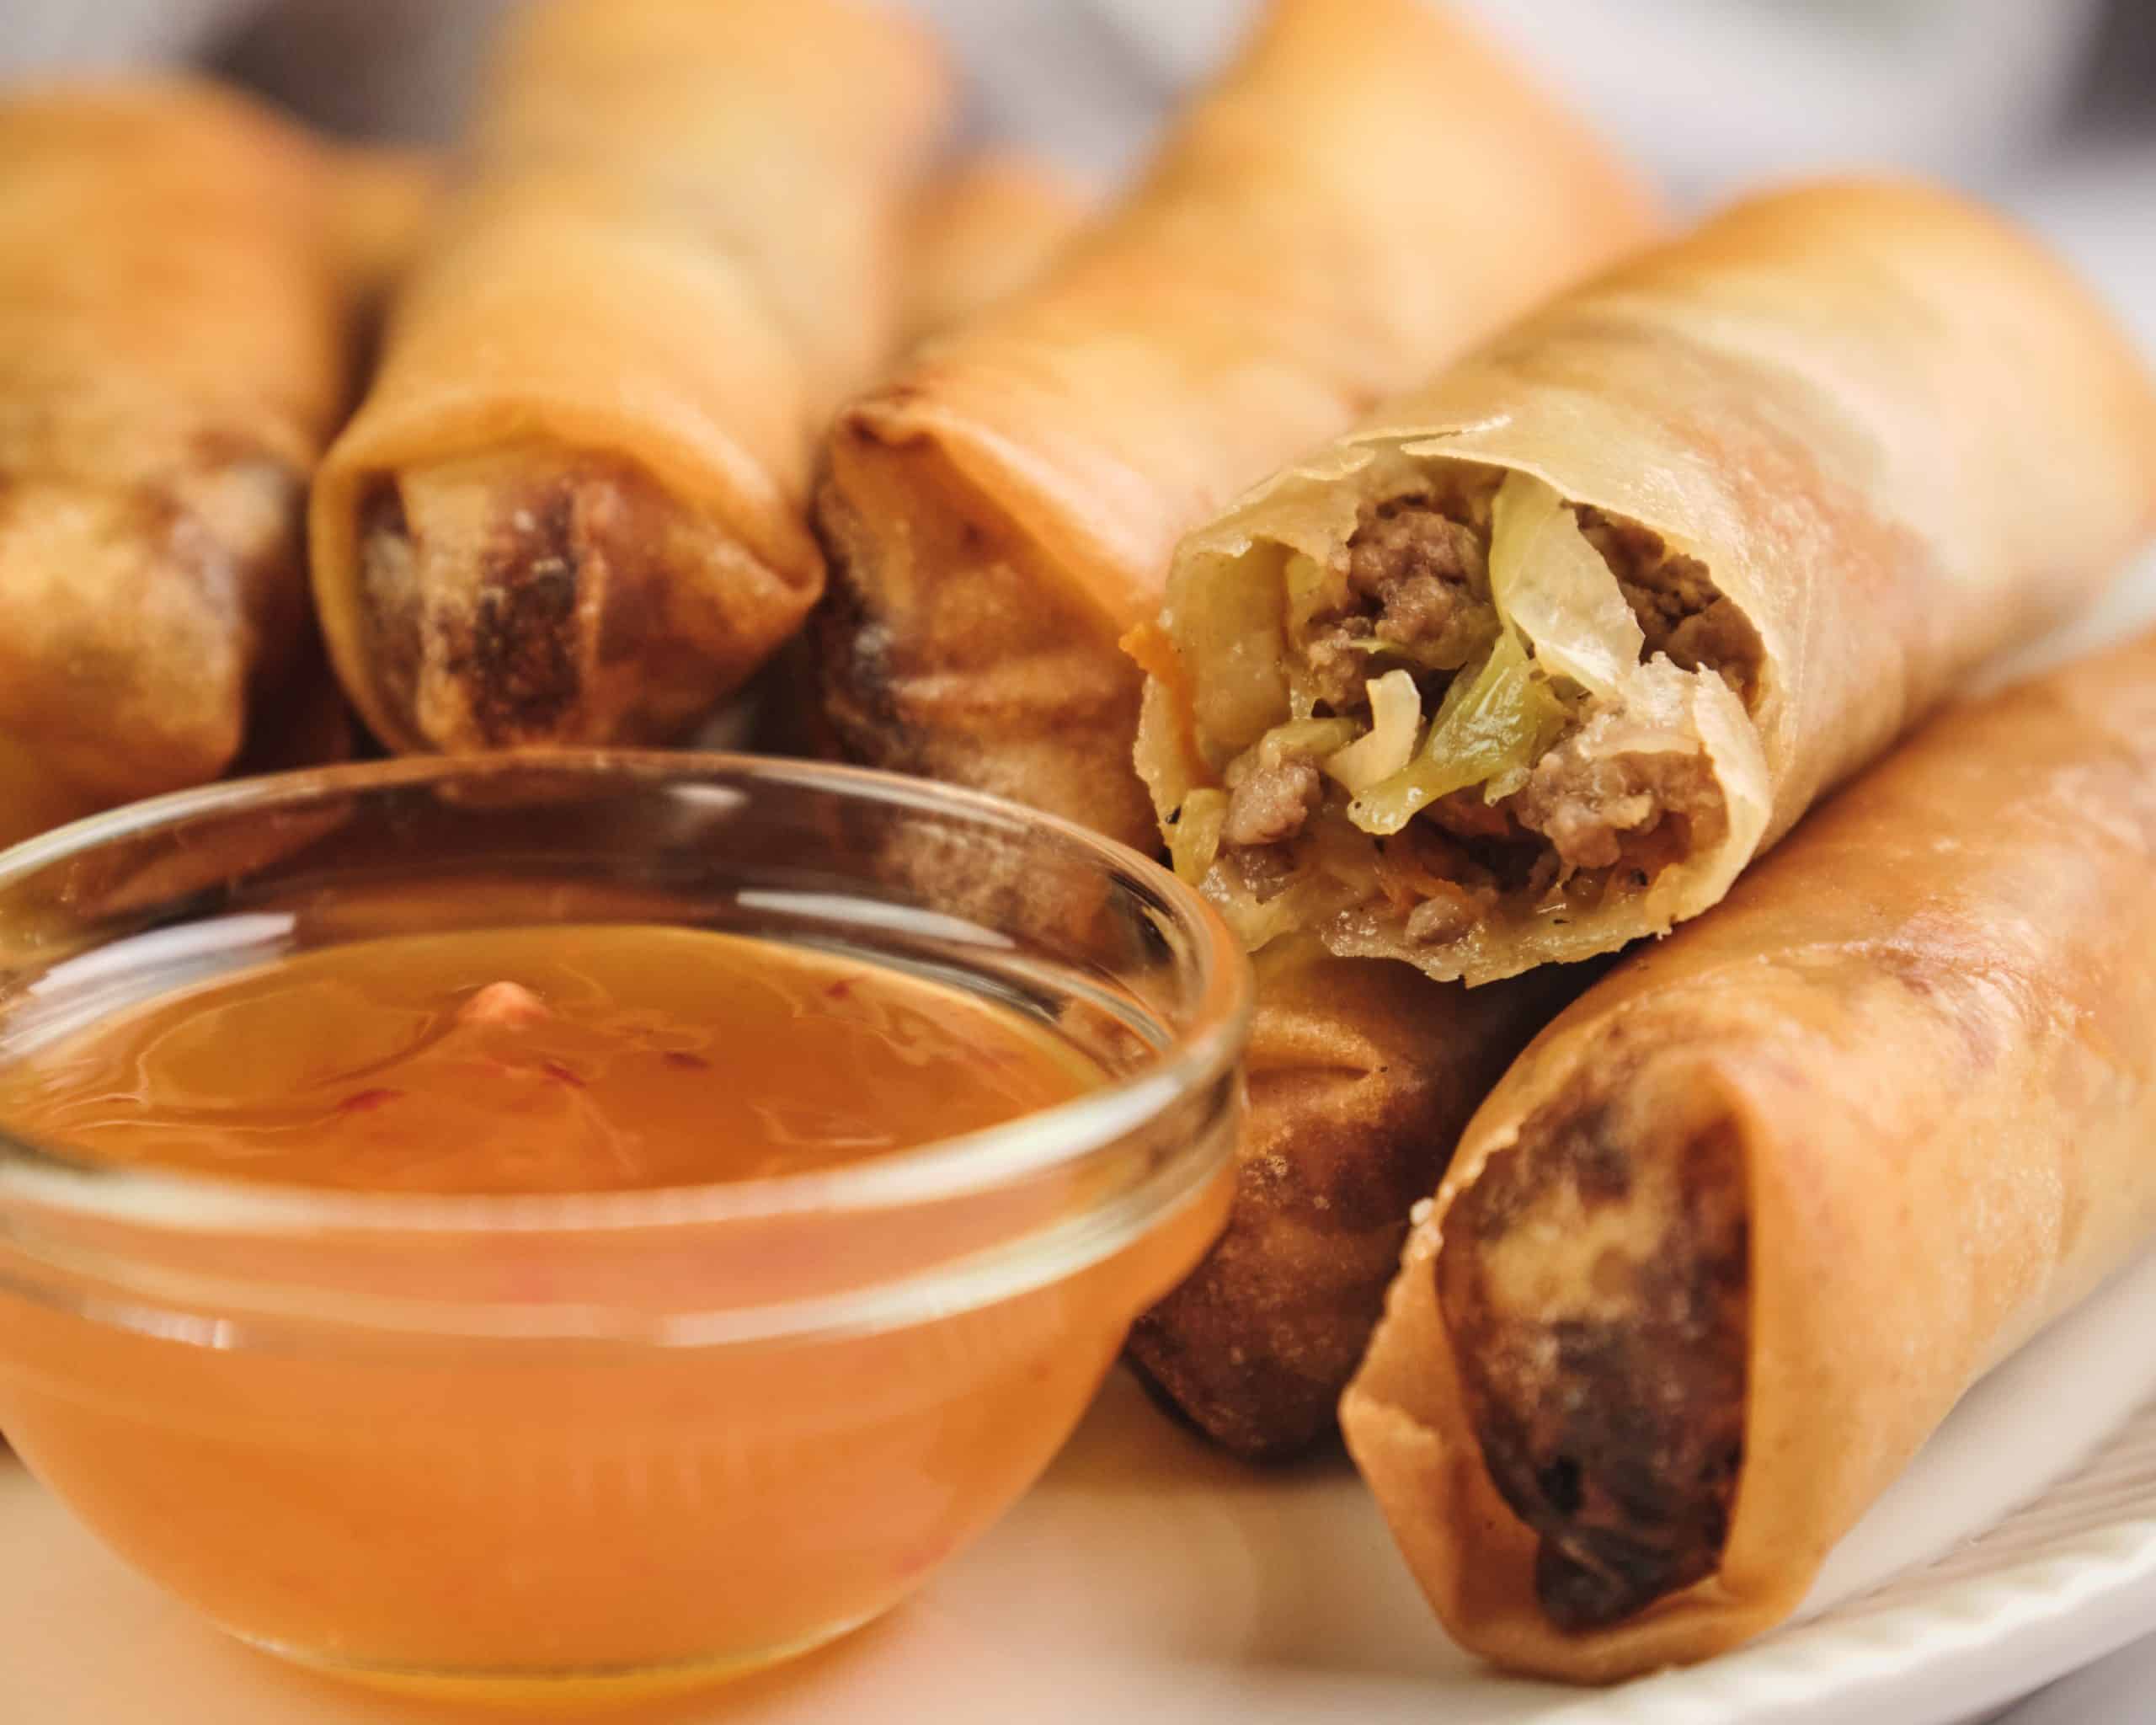 For family dinners, parties, or just for your indulgence, homemade lumpia should be your number-one pick. It's crunchy, juicy, and irresistible. Composed of ground pork, mixed veggies, and seasonings, this lumpia recipe will satisfy your tastebuds. But what does lumpia mean?